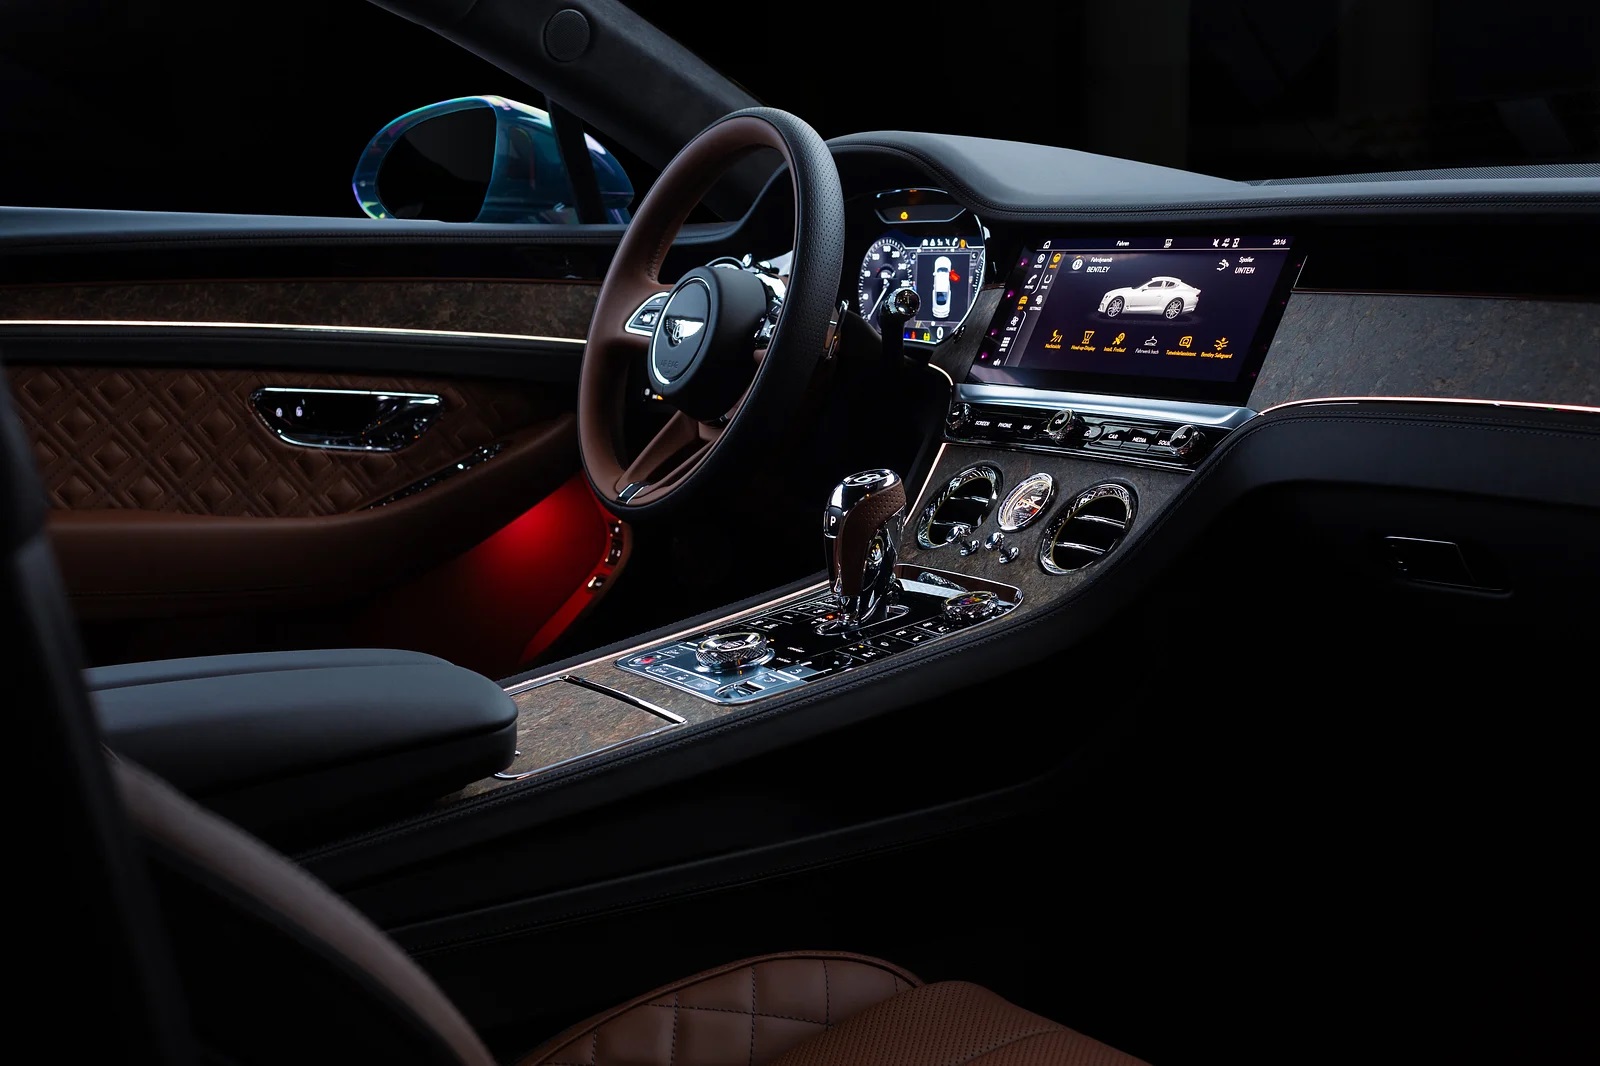 Bentley Zurich celebrates Centenary with a Mulliner Anniversary Collection